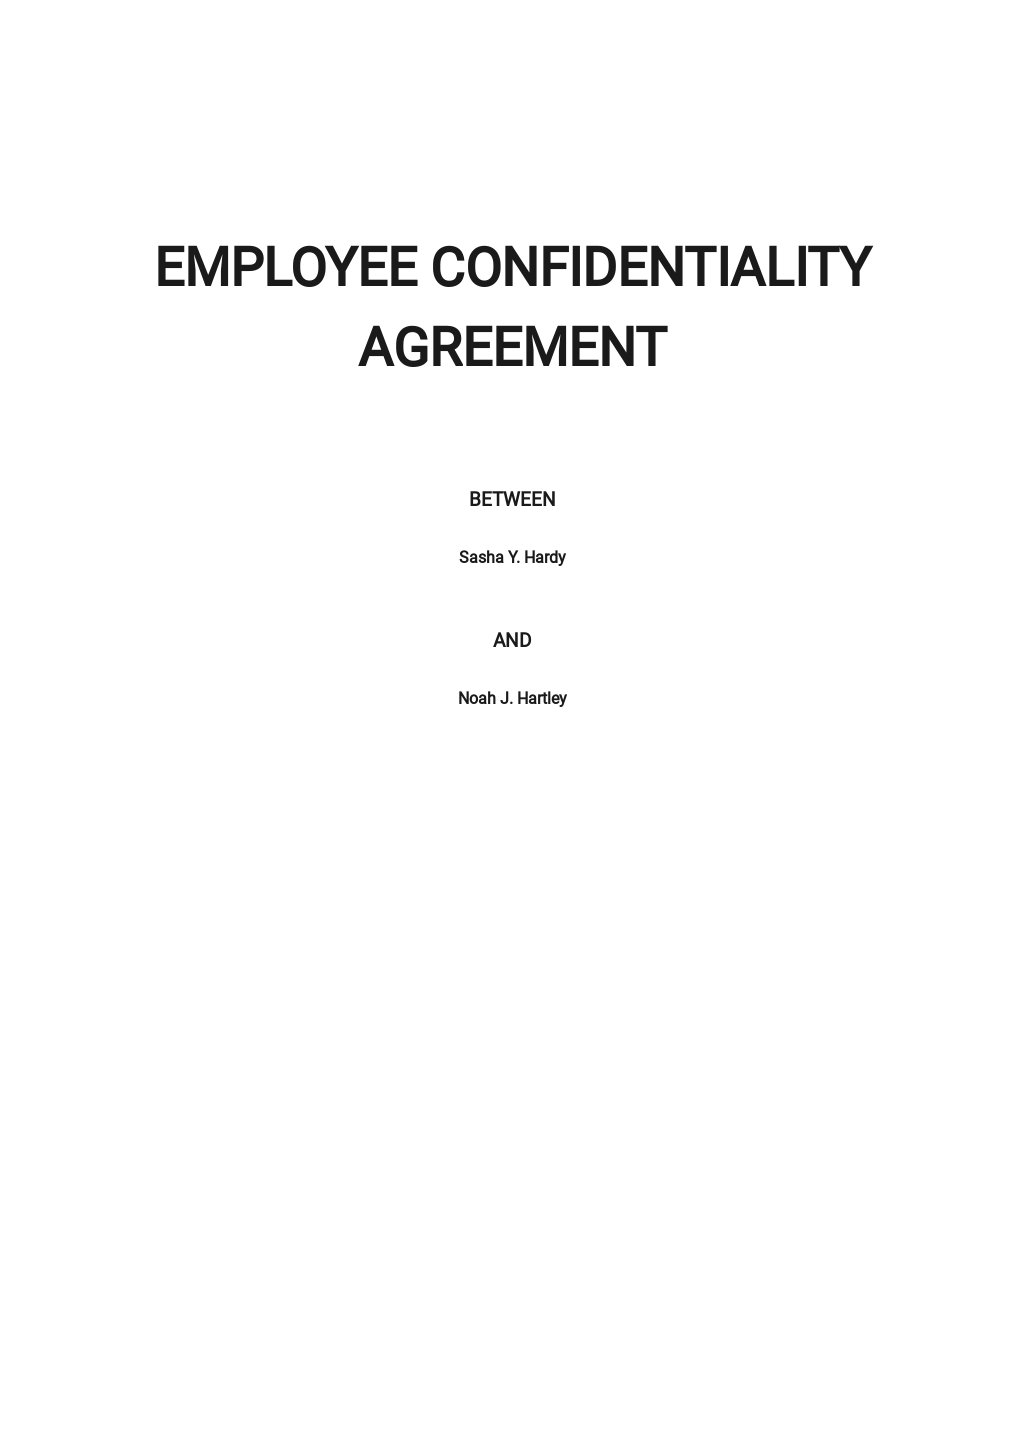 Sample Employee Confidentiality Agreement Template.jpe